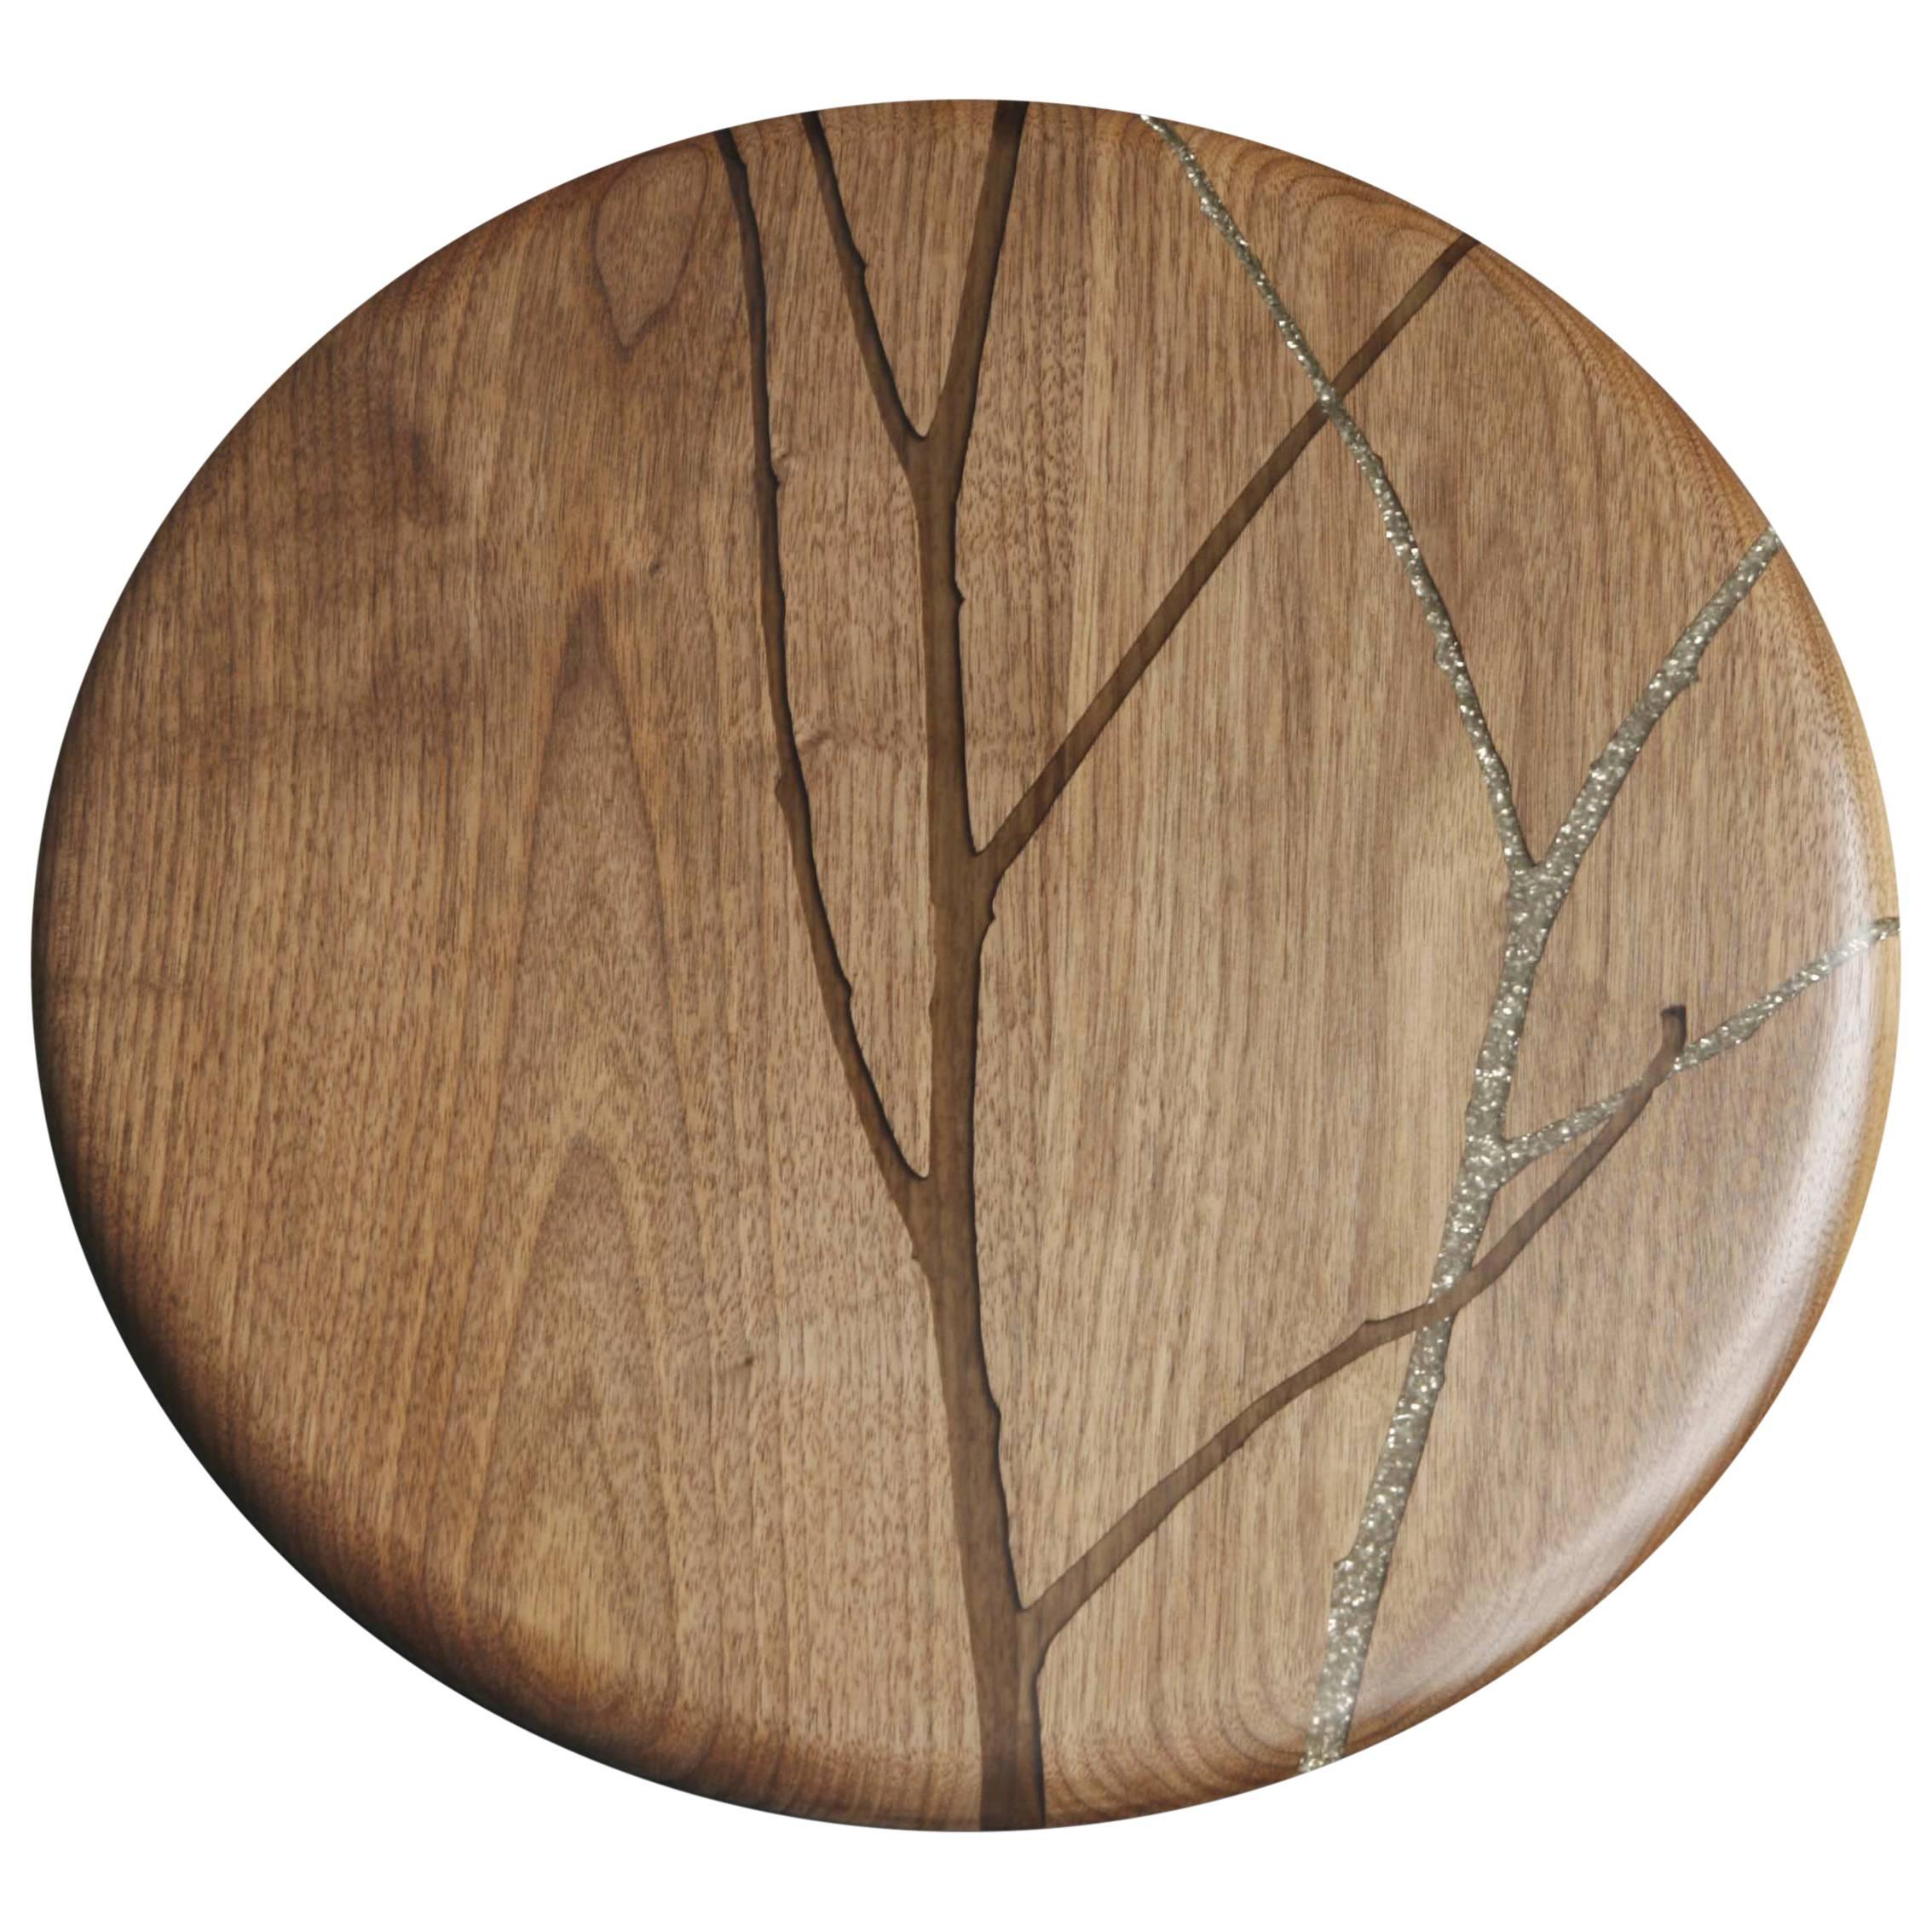 Hazy Floozan Centerpiece Turntable Tray in Walnut and Inlaid Resin - In Stock For Sale